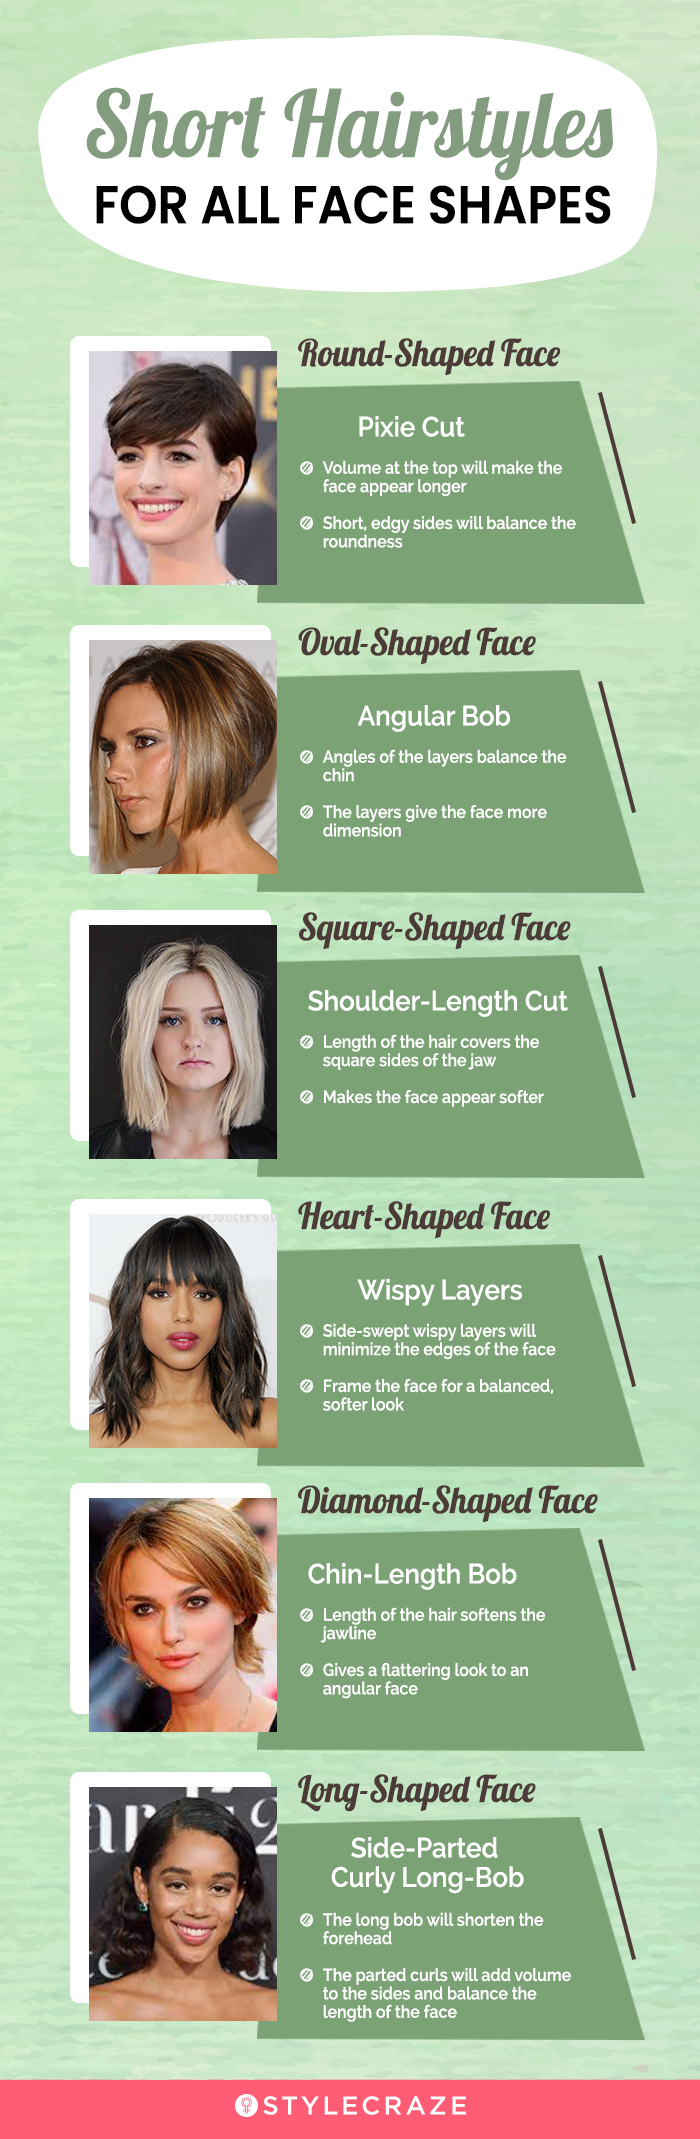 6 Trendy Hairstyles For Different Face Shapes